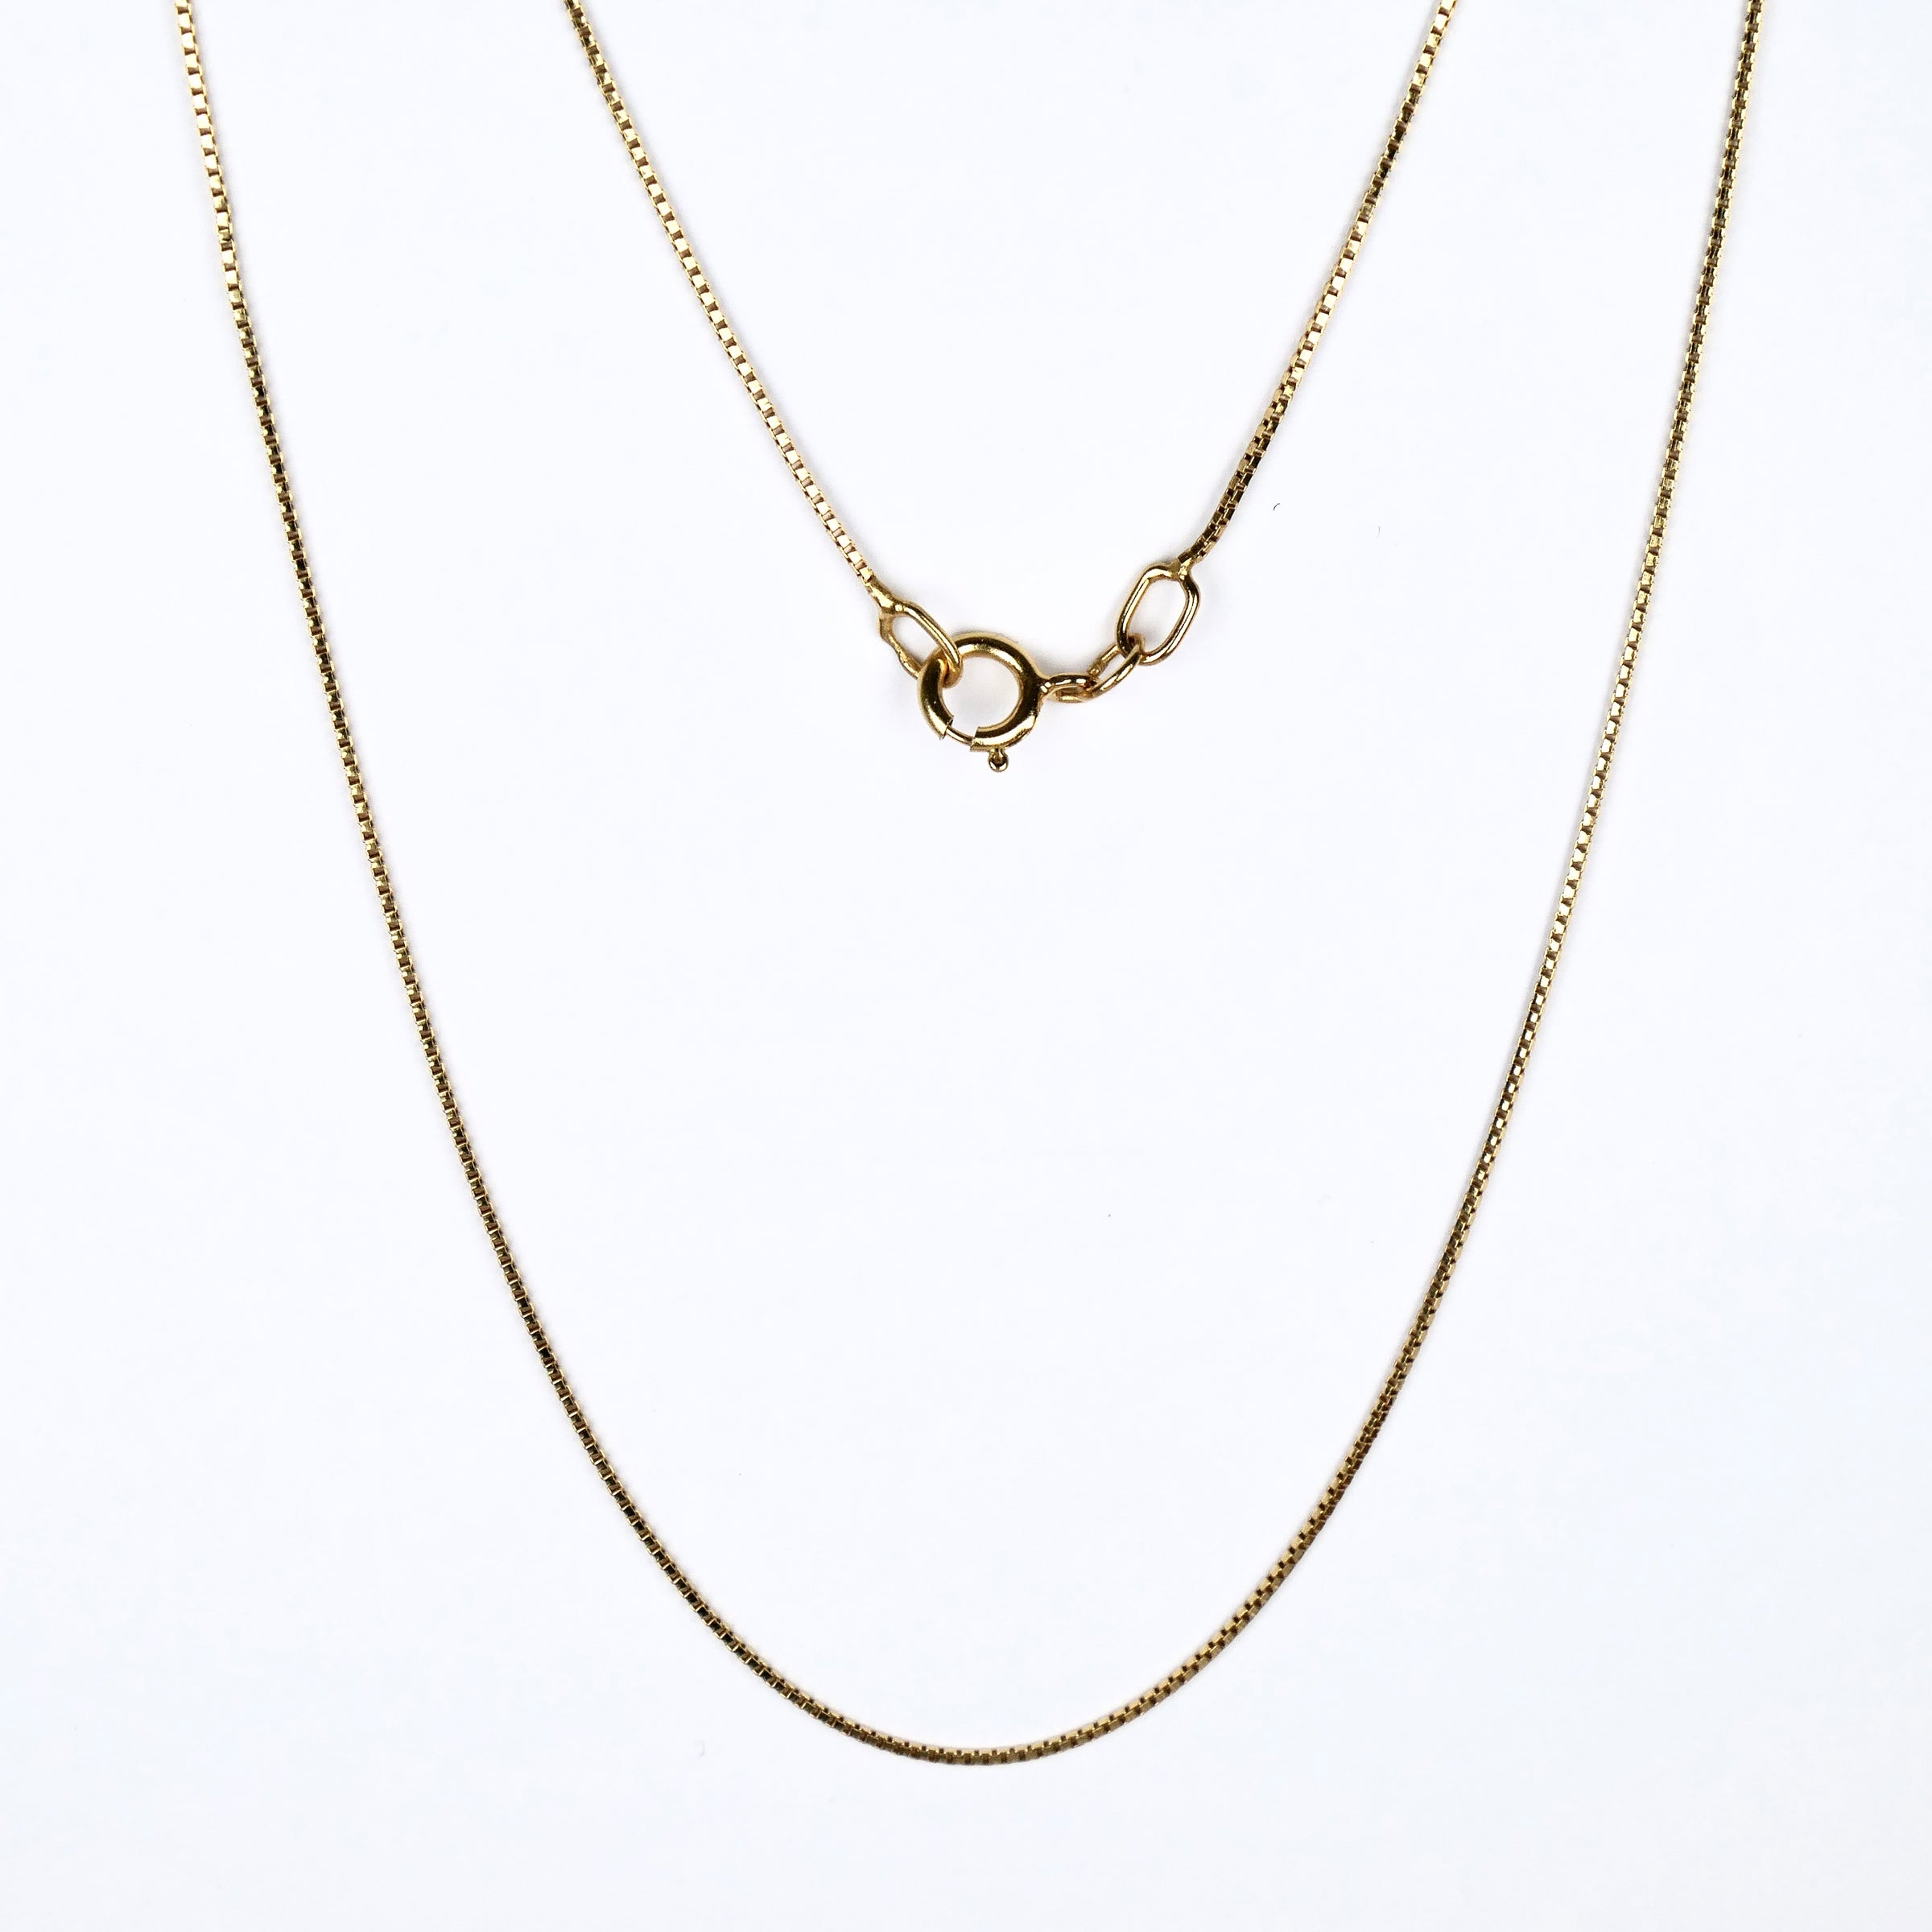 10K Yellow Gold 16" Box Link Chain Necklace